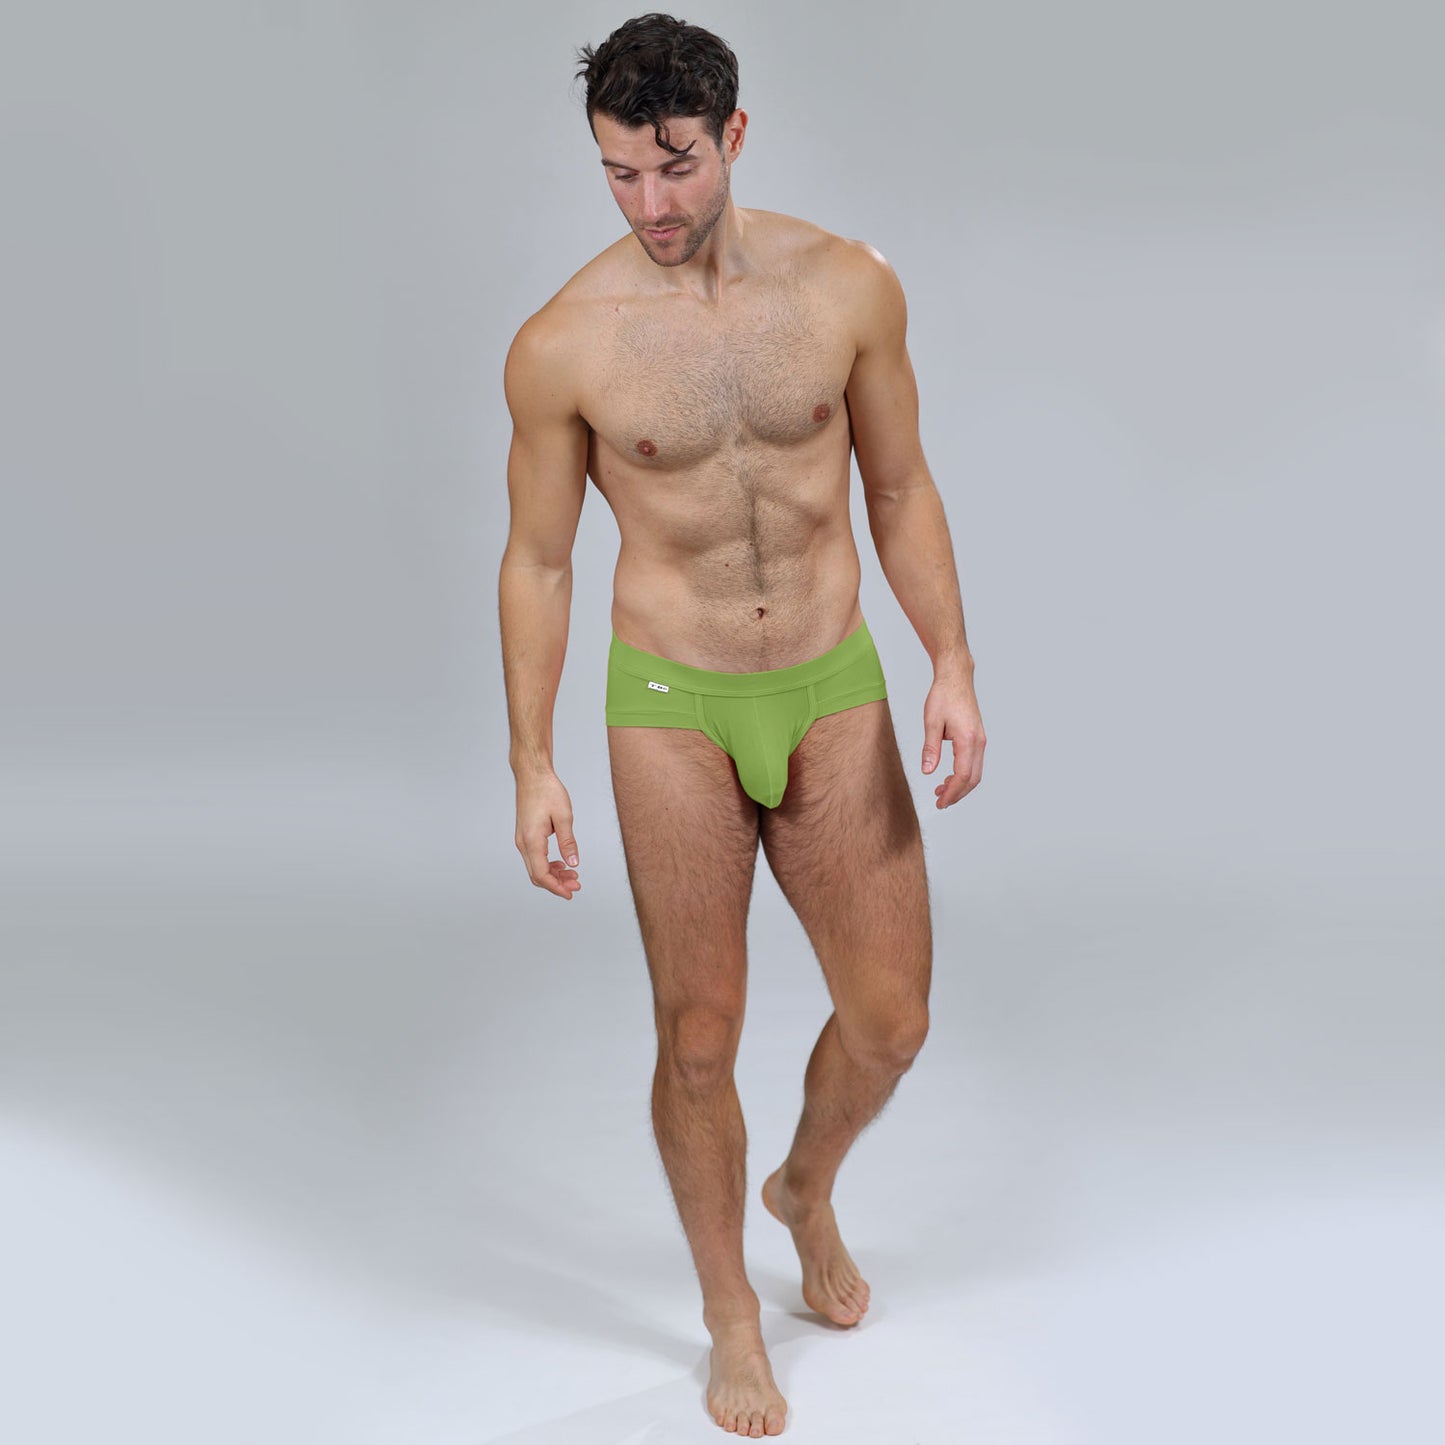 The Limited Edition Greenery Brief for men in the USA and Canada